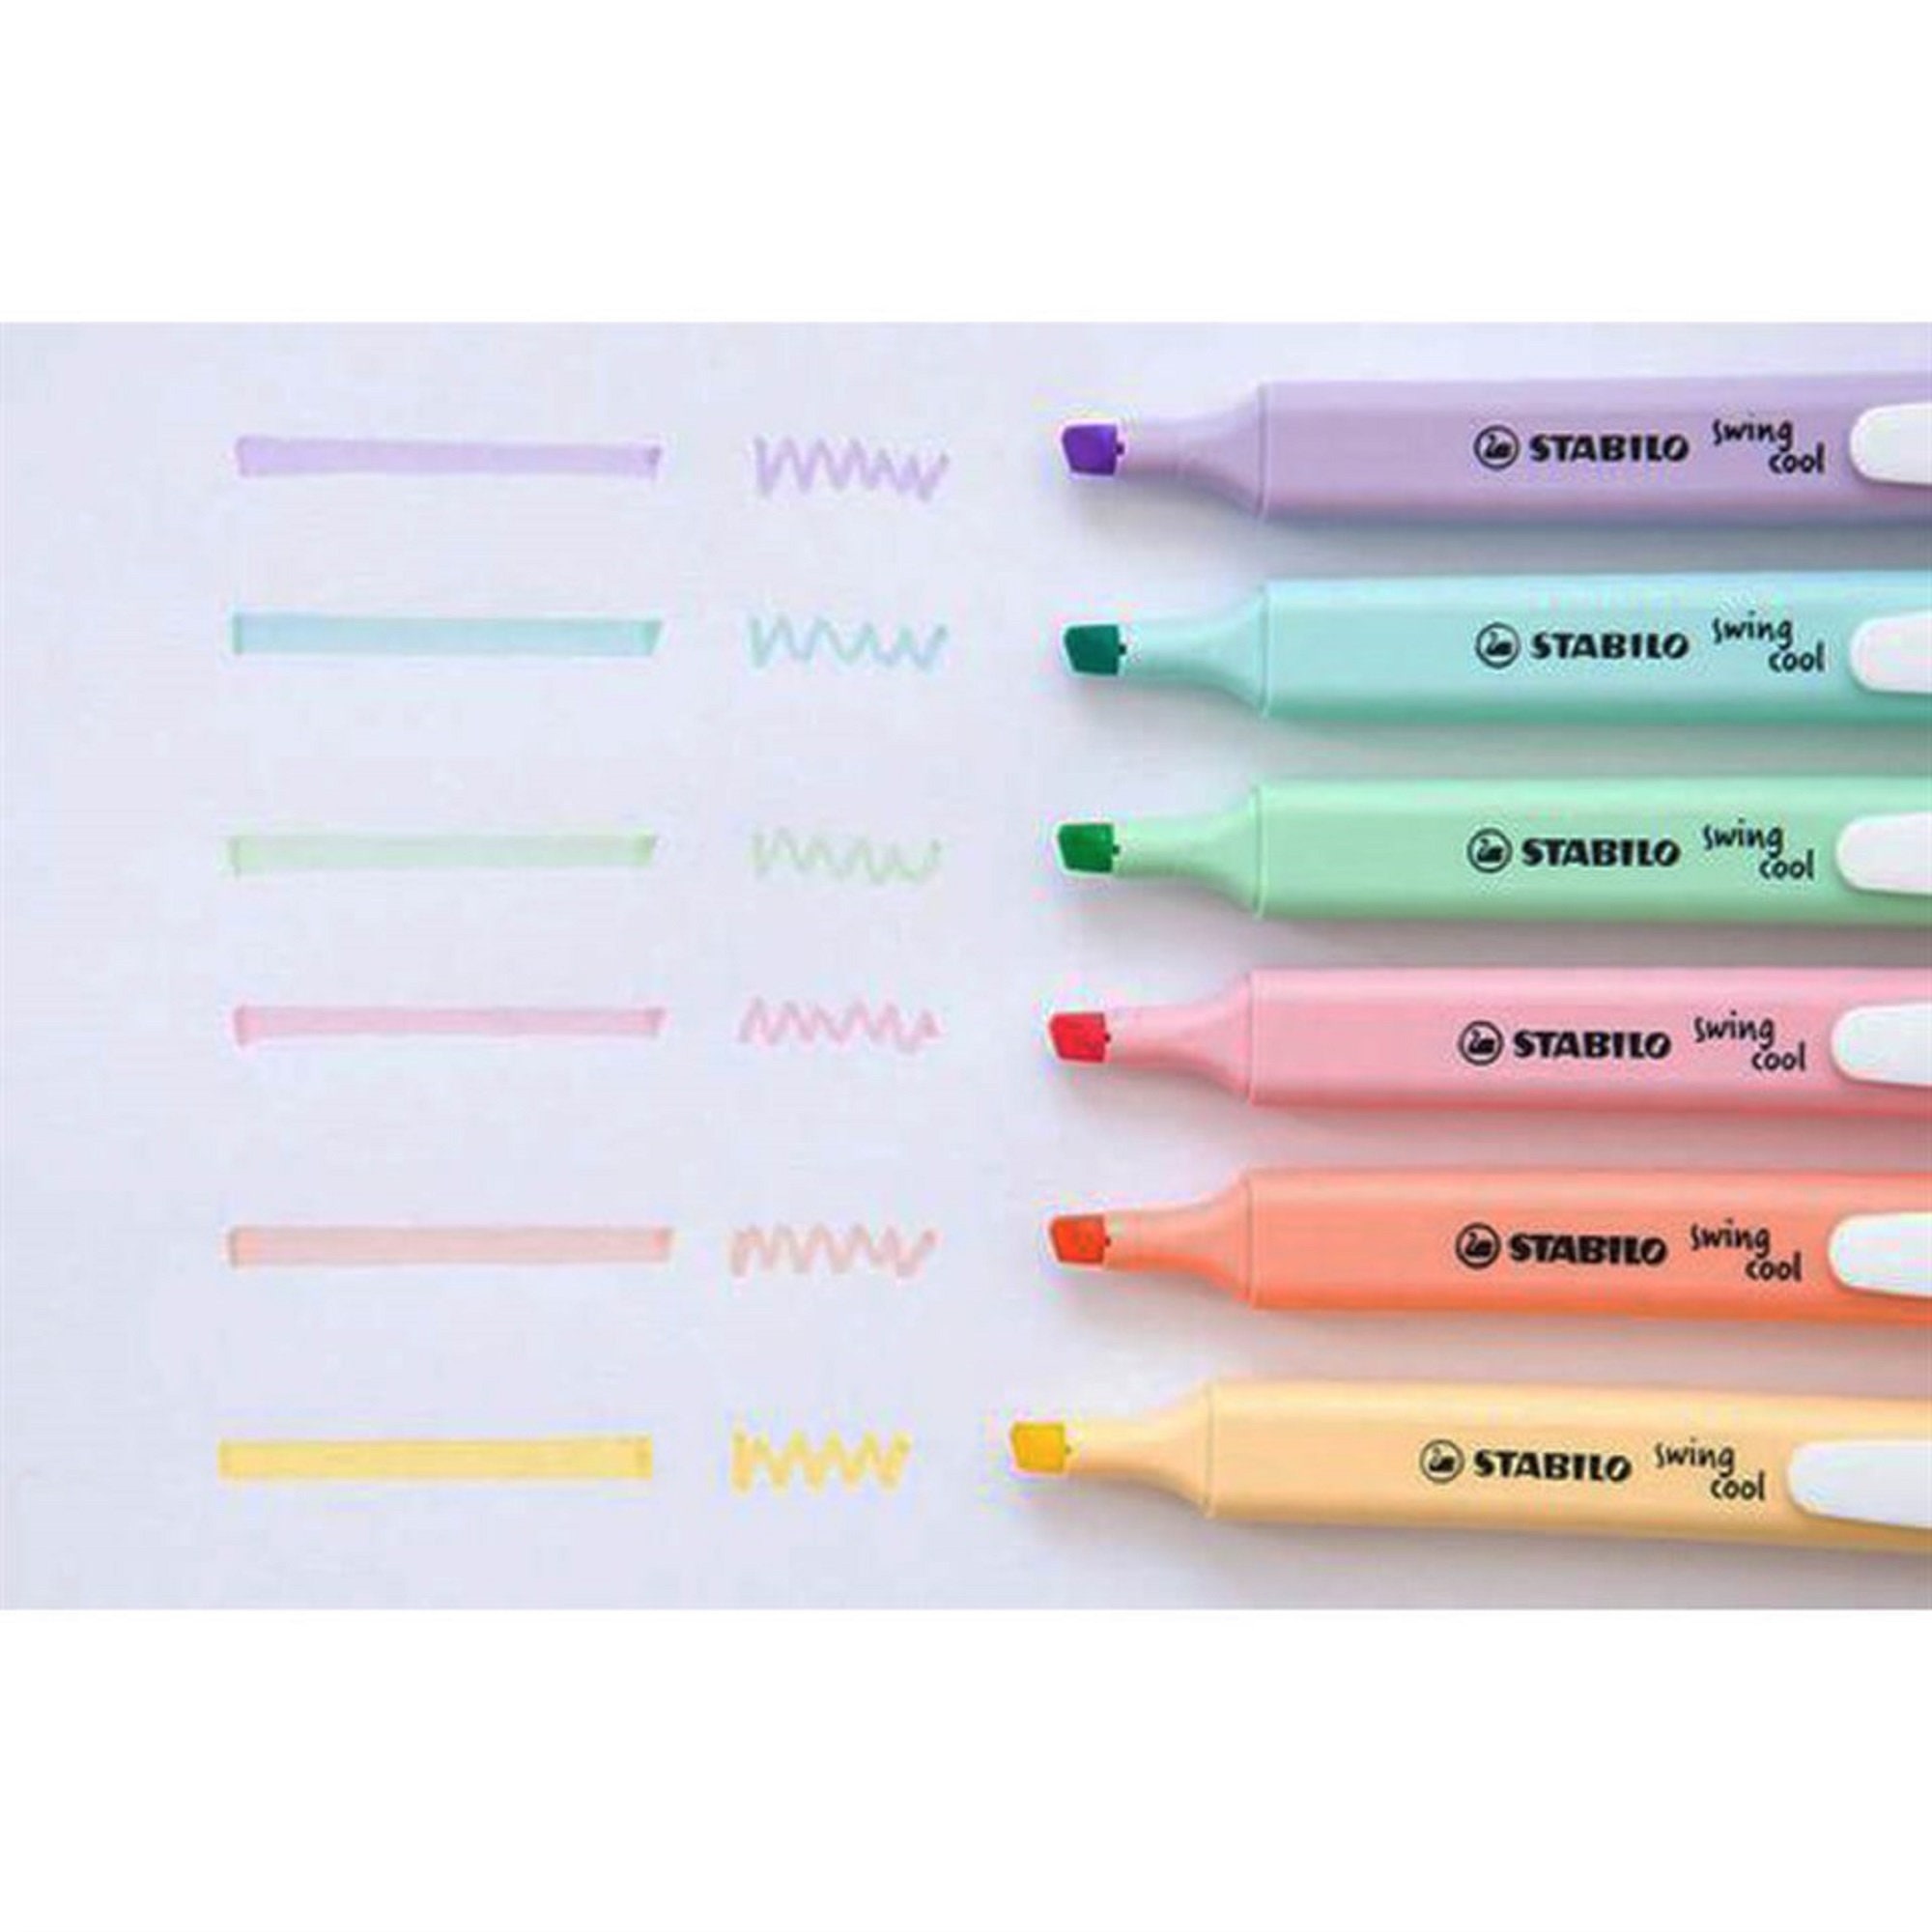 Stabilo Swing Cool Pastel Highlighter Pens Available in Turquoise, Milky  Yellow, Pink Blush, Lilac Haze, Creamy Peach or Hint of Mint. -  UK